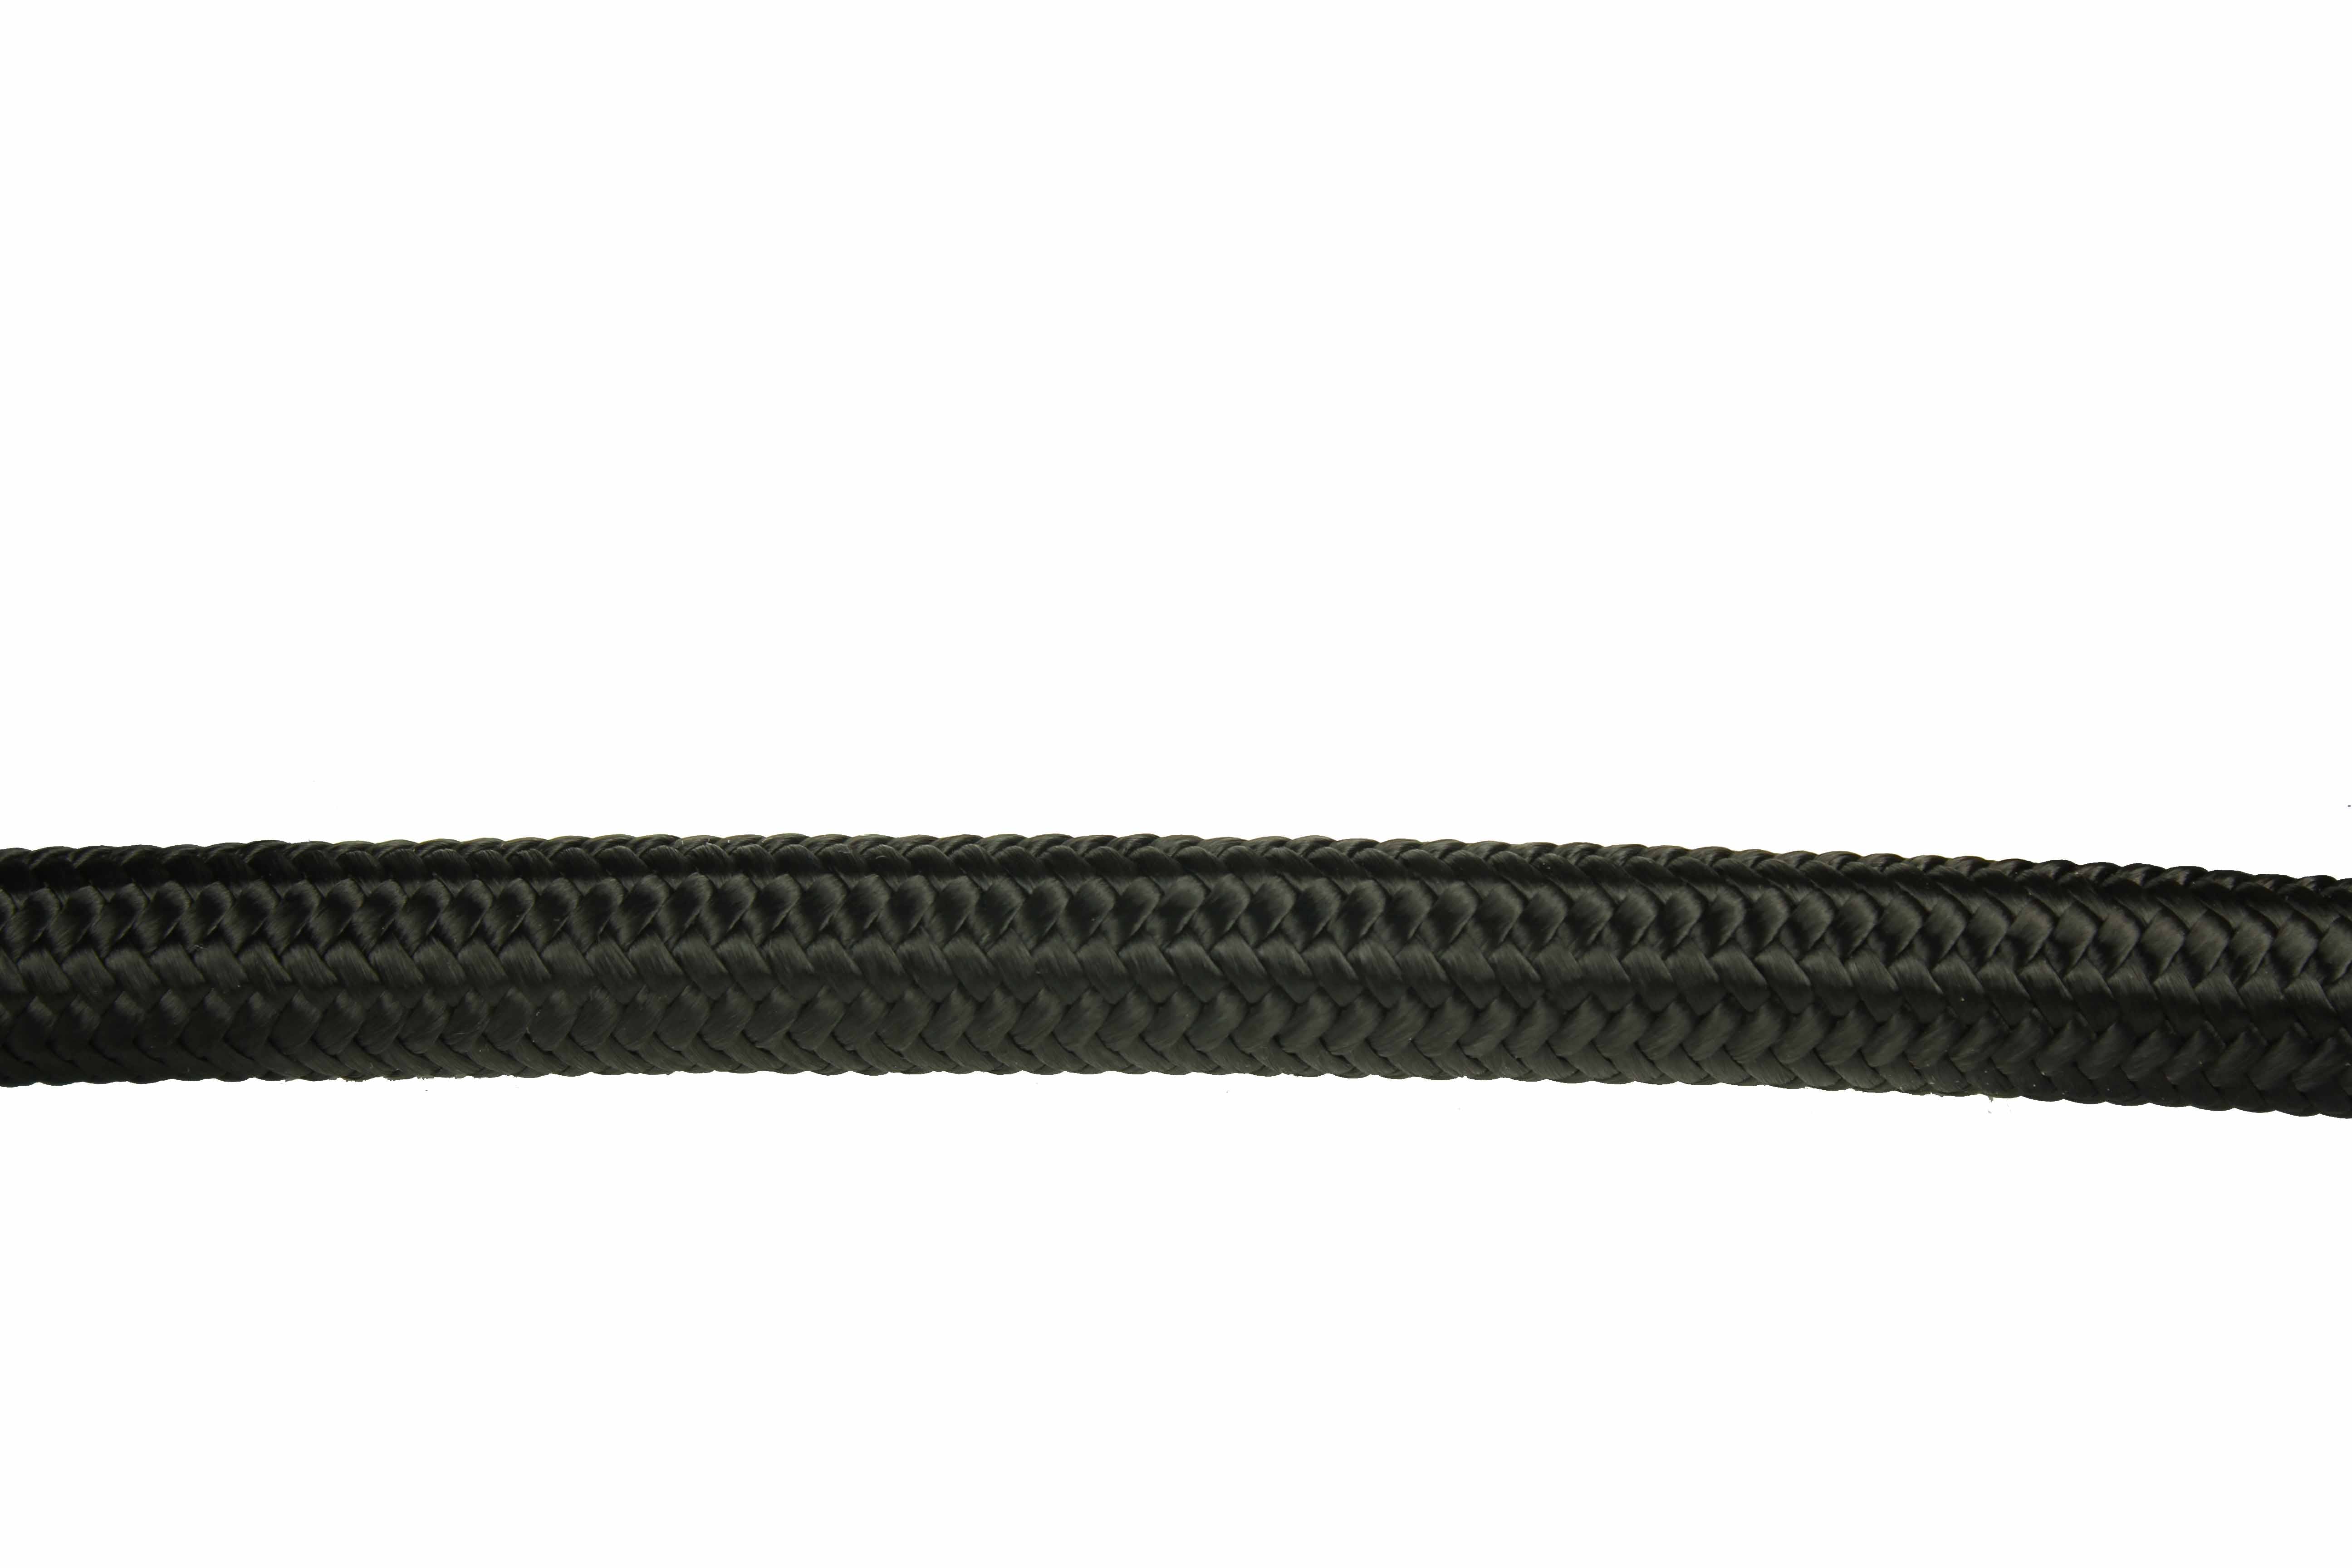 Redhorse Performance 230-10-10 -10 ProSeries Black 230 stainless core hose - 10 feet